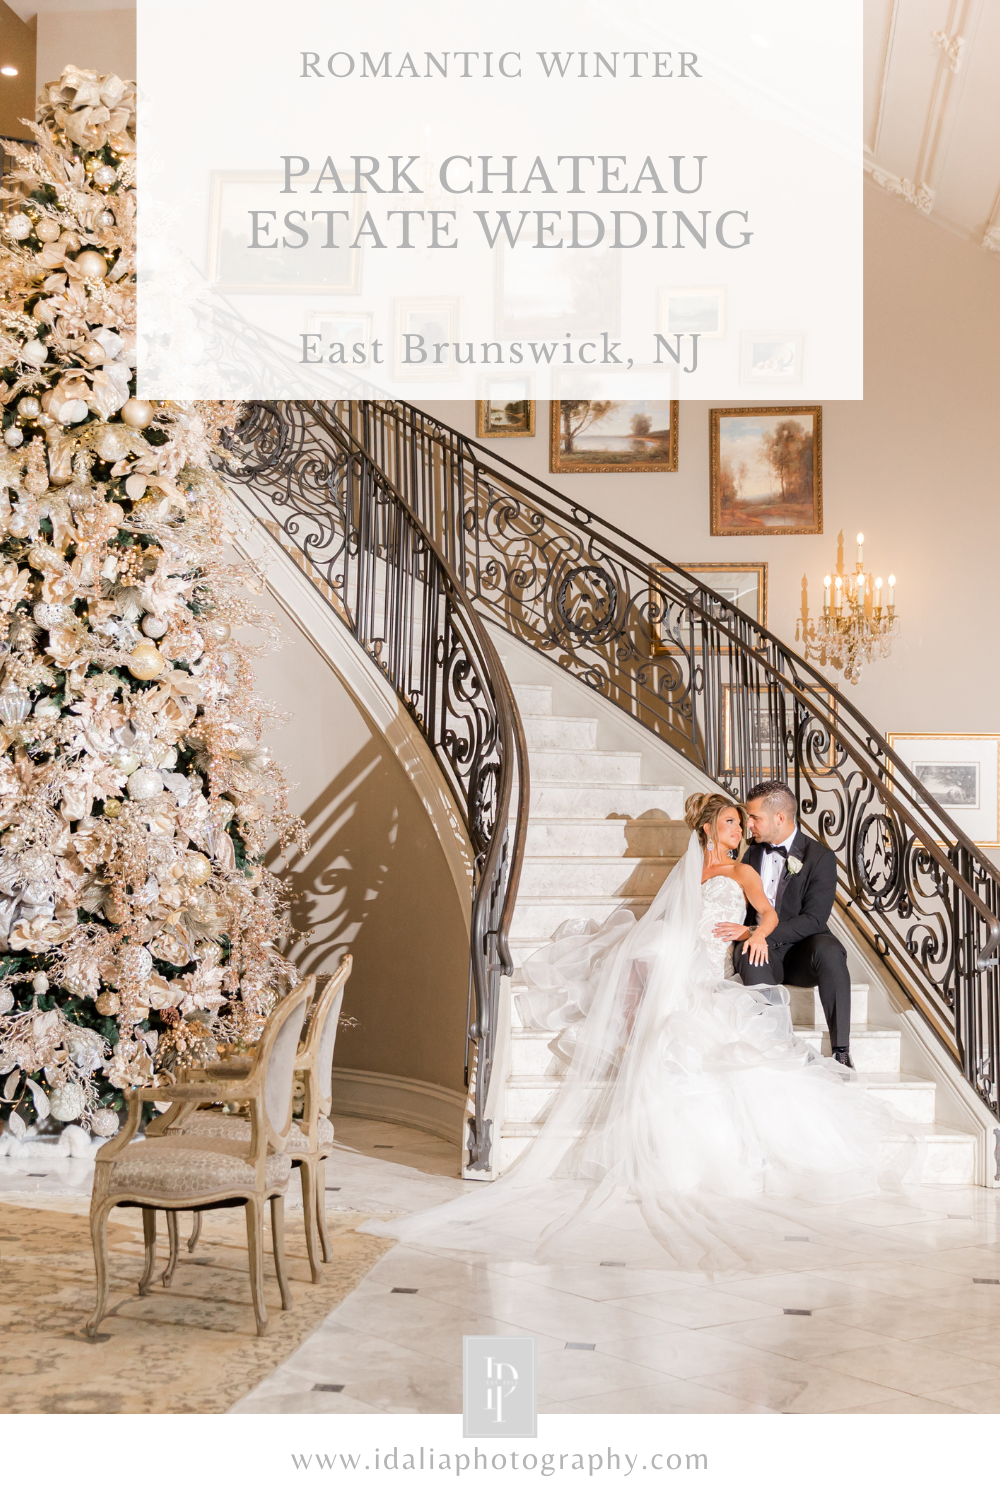 Romantic winter Park Chateau Estate Wedding in New Jersey photographed by NJ wedding photographer Idalia Photography